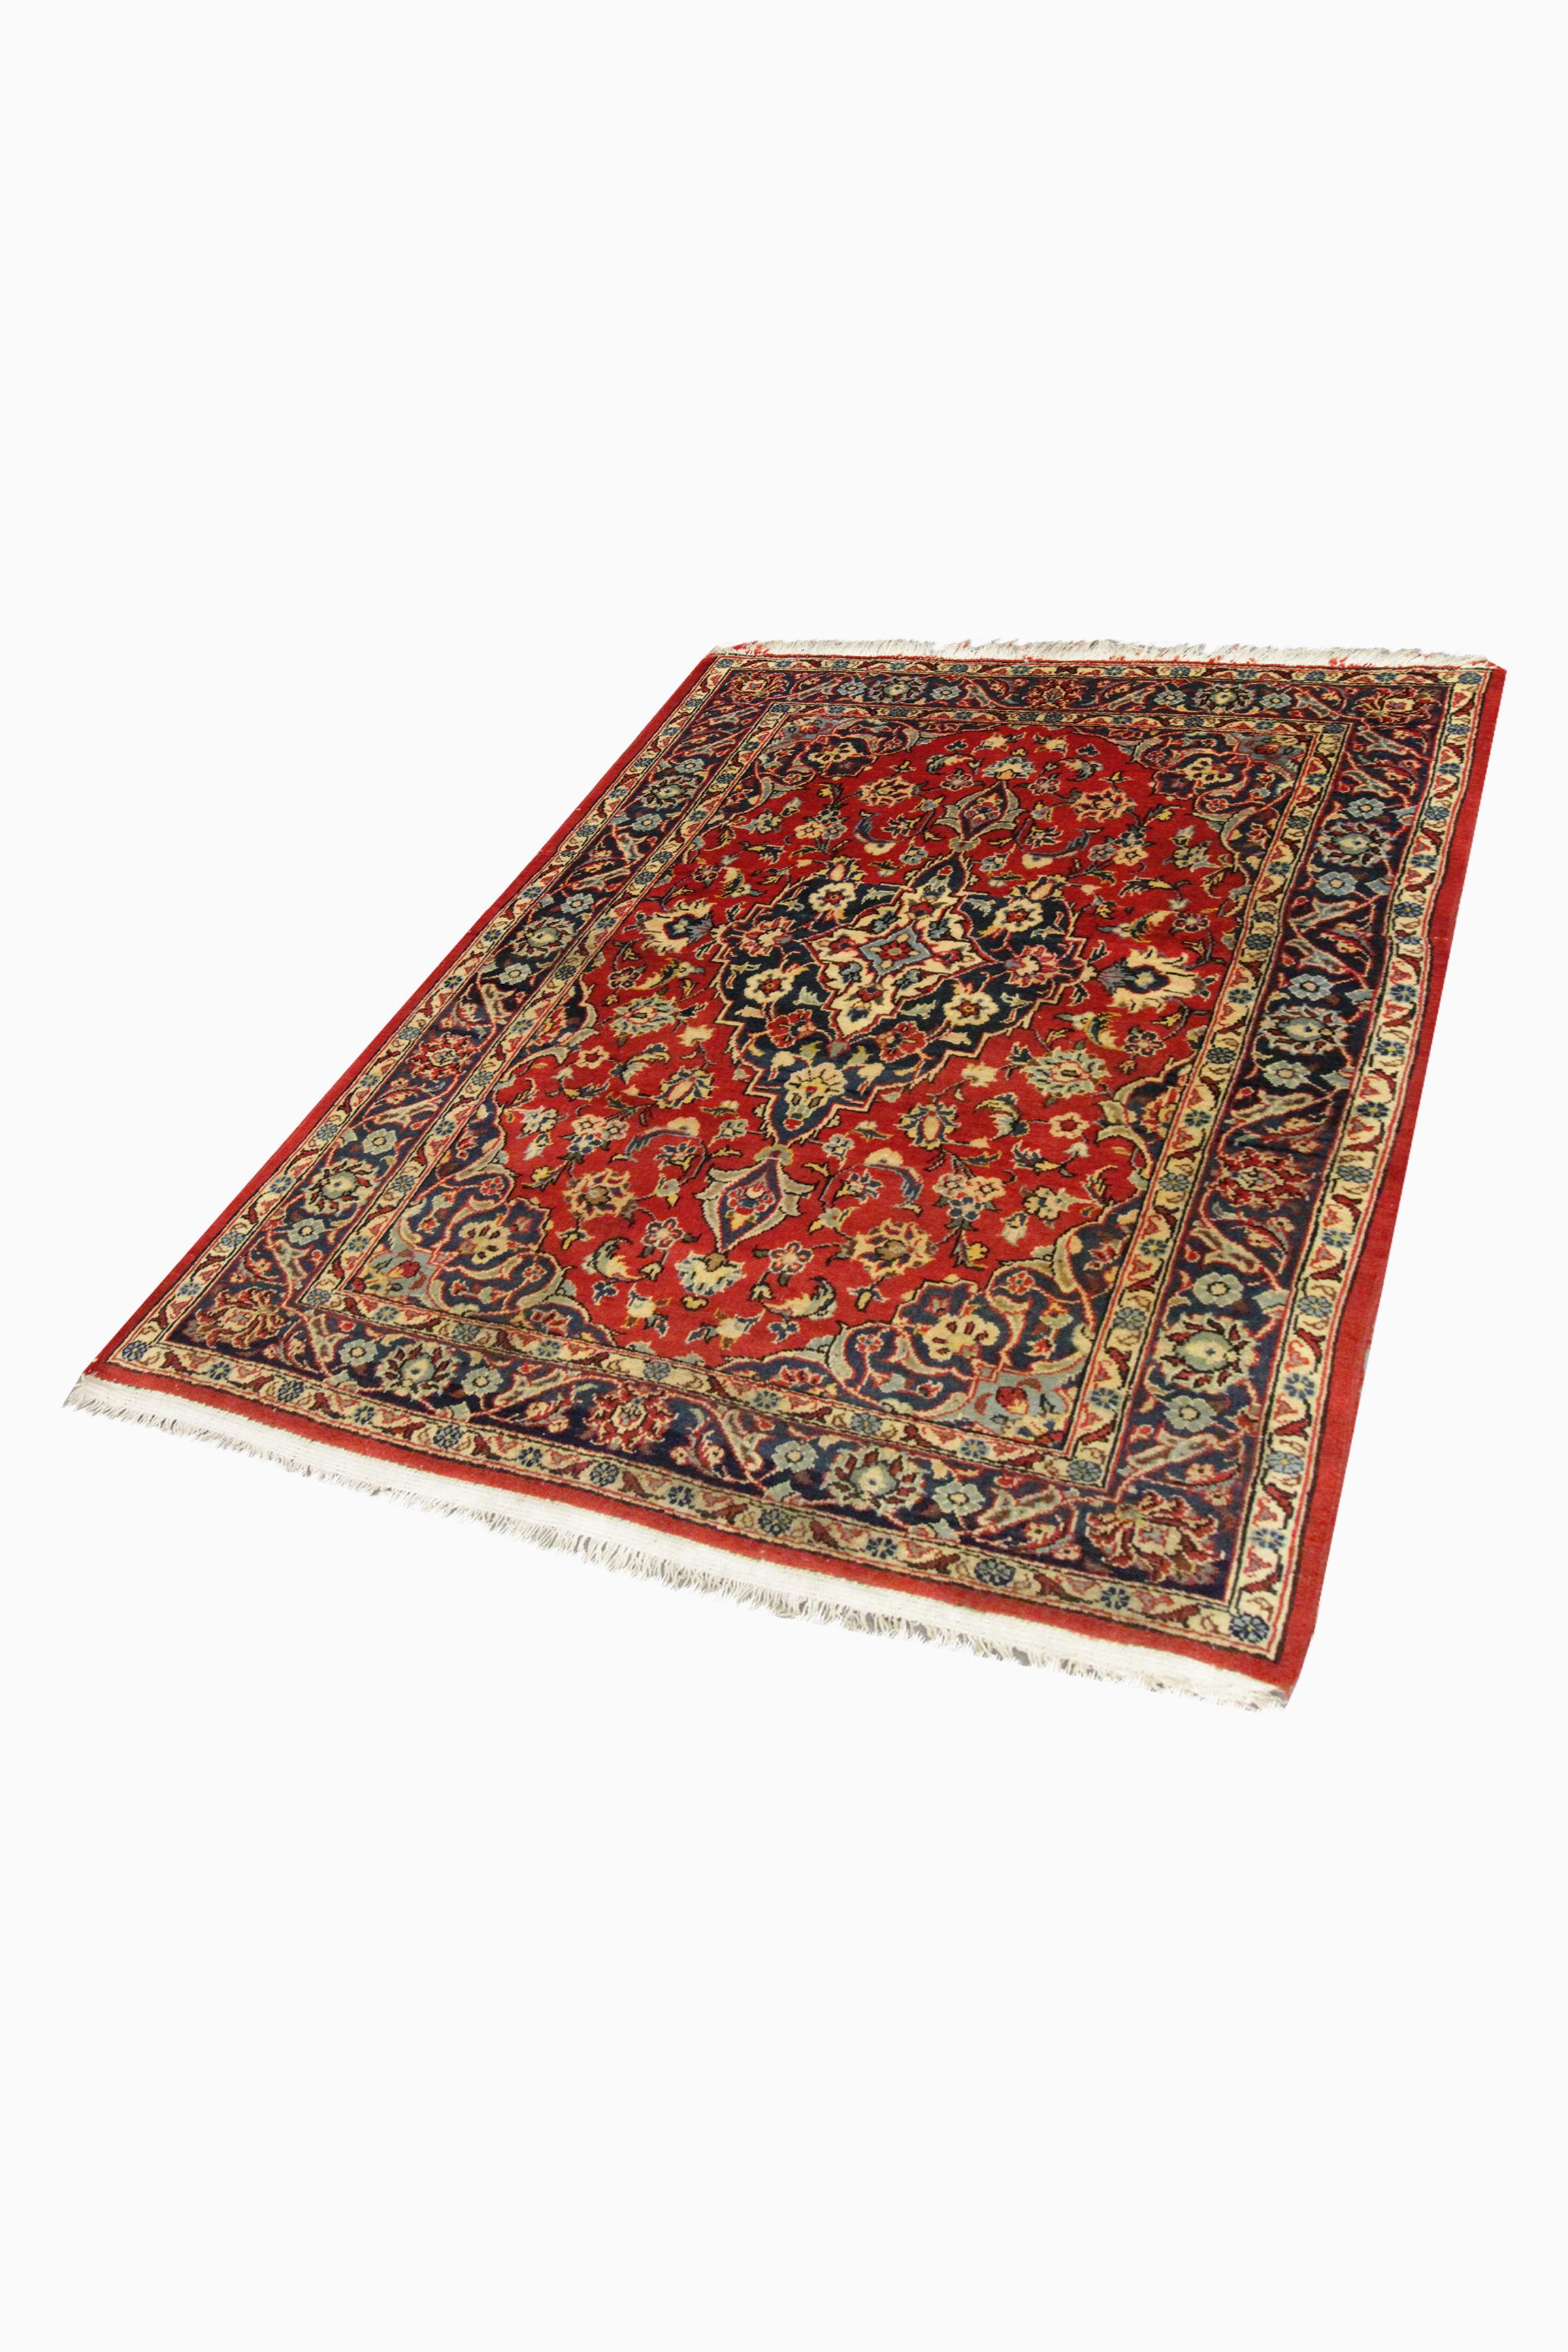 This fine handwoven oriental wool area rug is a fantastic example of vintage rugs woven in the mid 20th century. The design has been woven on a rich red background with accents of blue, beige, rust and green accents that make up the intricate